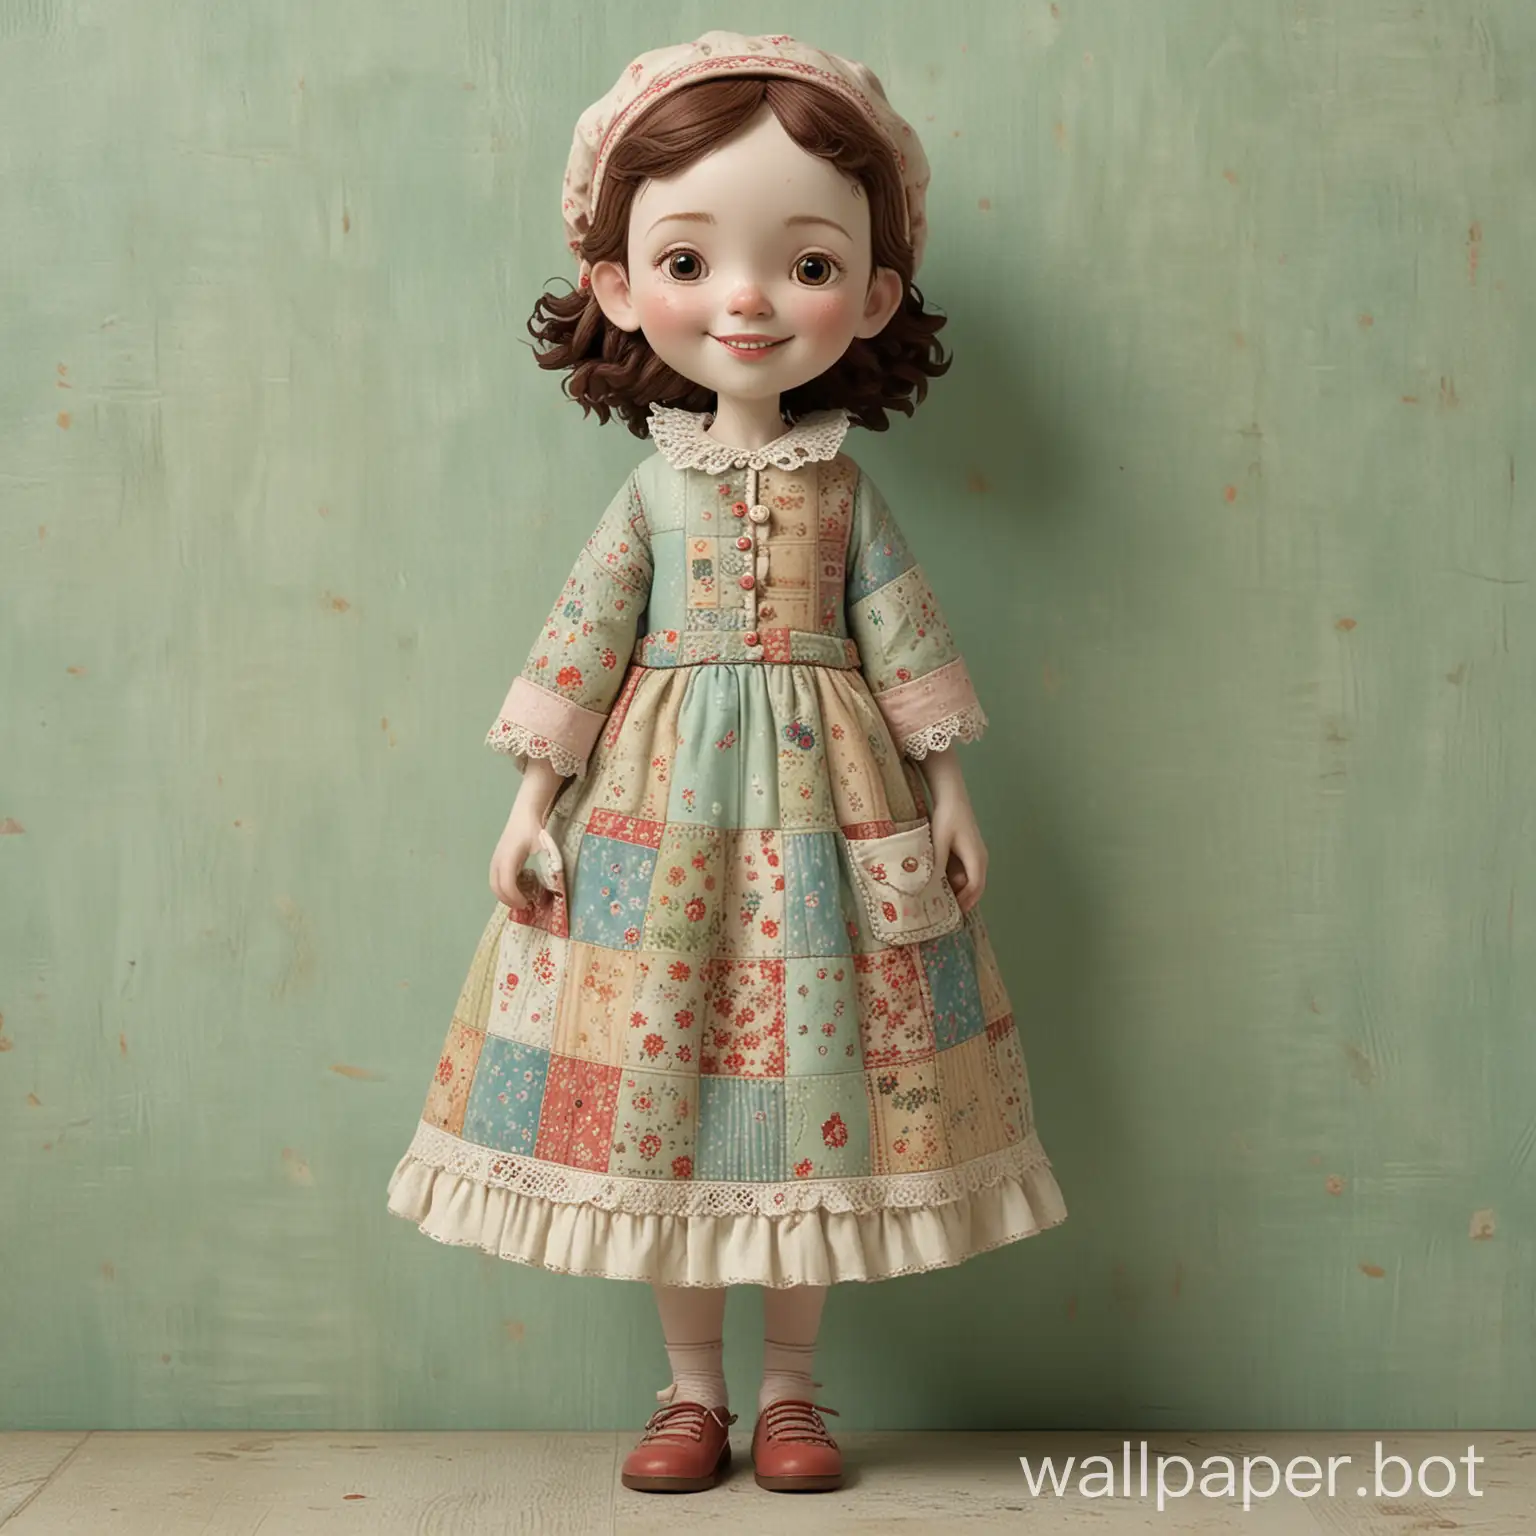 charming little lady in full-length patchwork clothes. dynamic, smiling, with freckles. Cozy, soft tones on a mint light distressed background, art by Suzanne Woolcott, Mark Ryden. 3D, porcelain, gloss